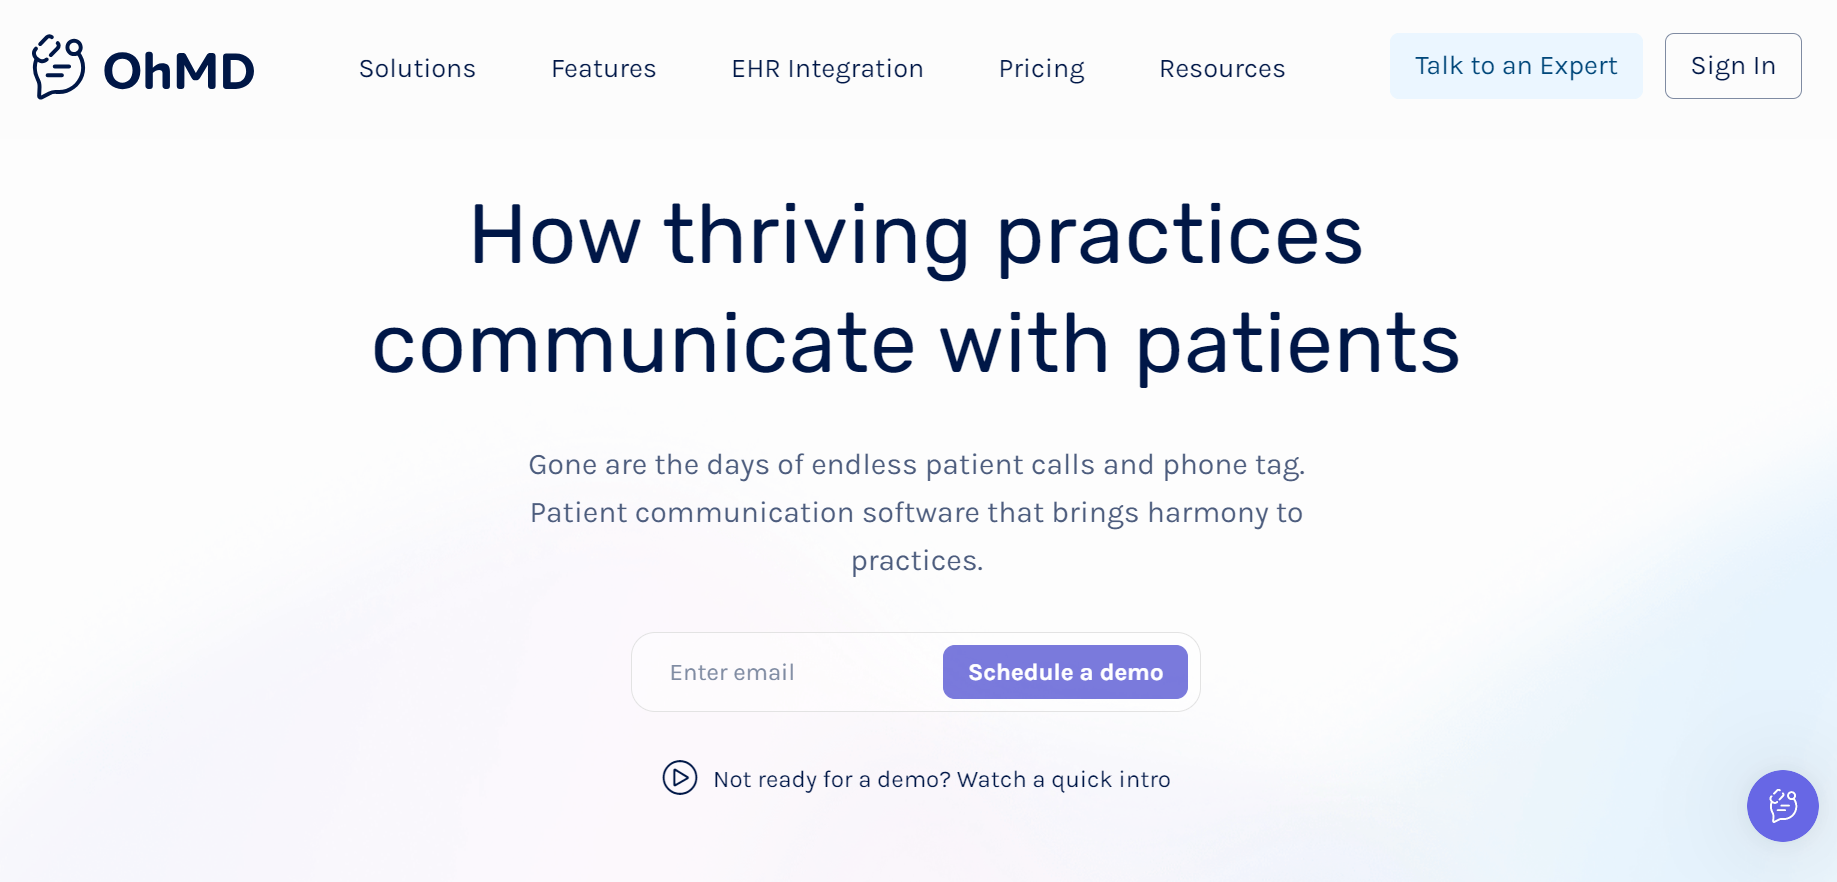 5 Best Tools for HIPAA-Compliant Texting With Patients